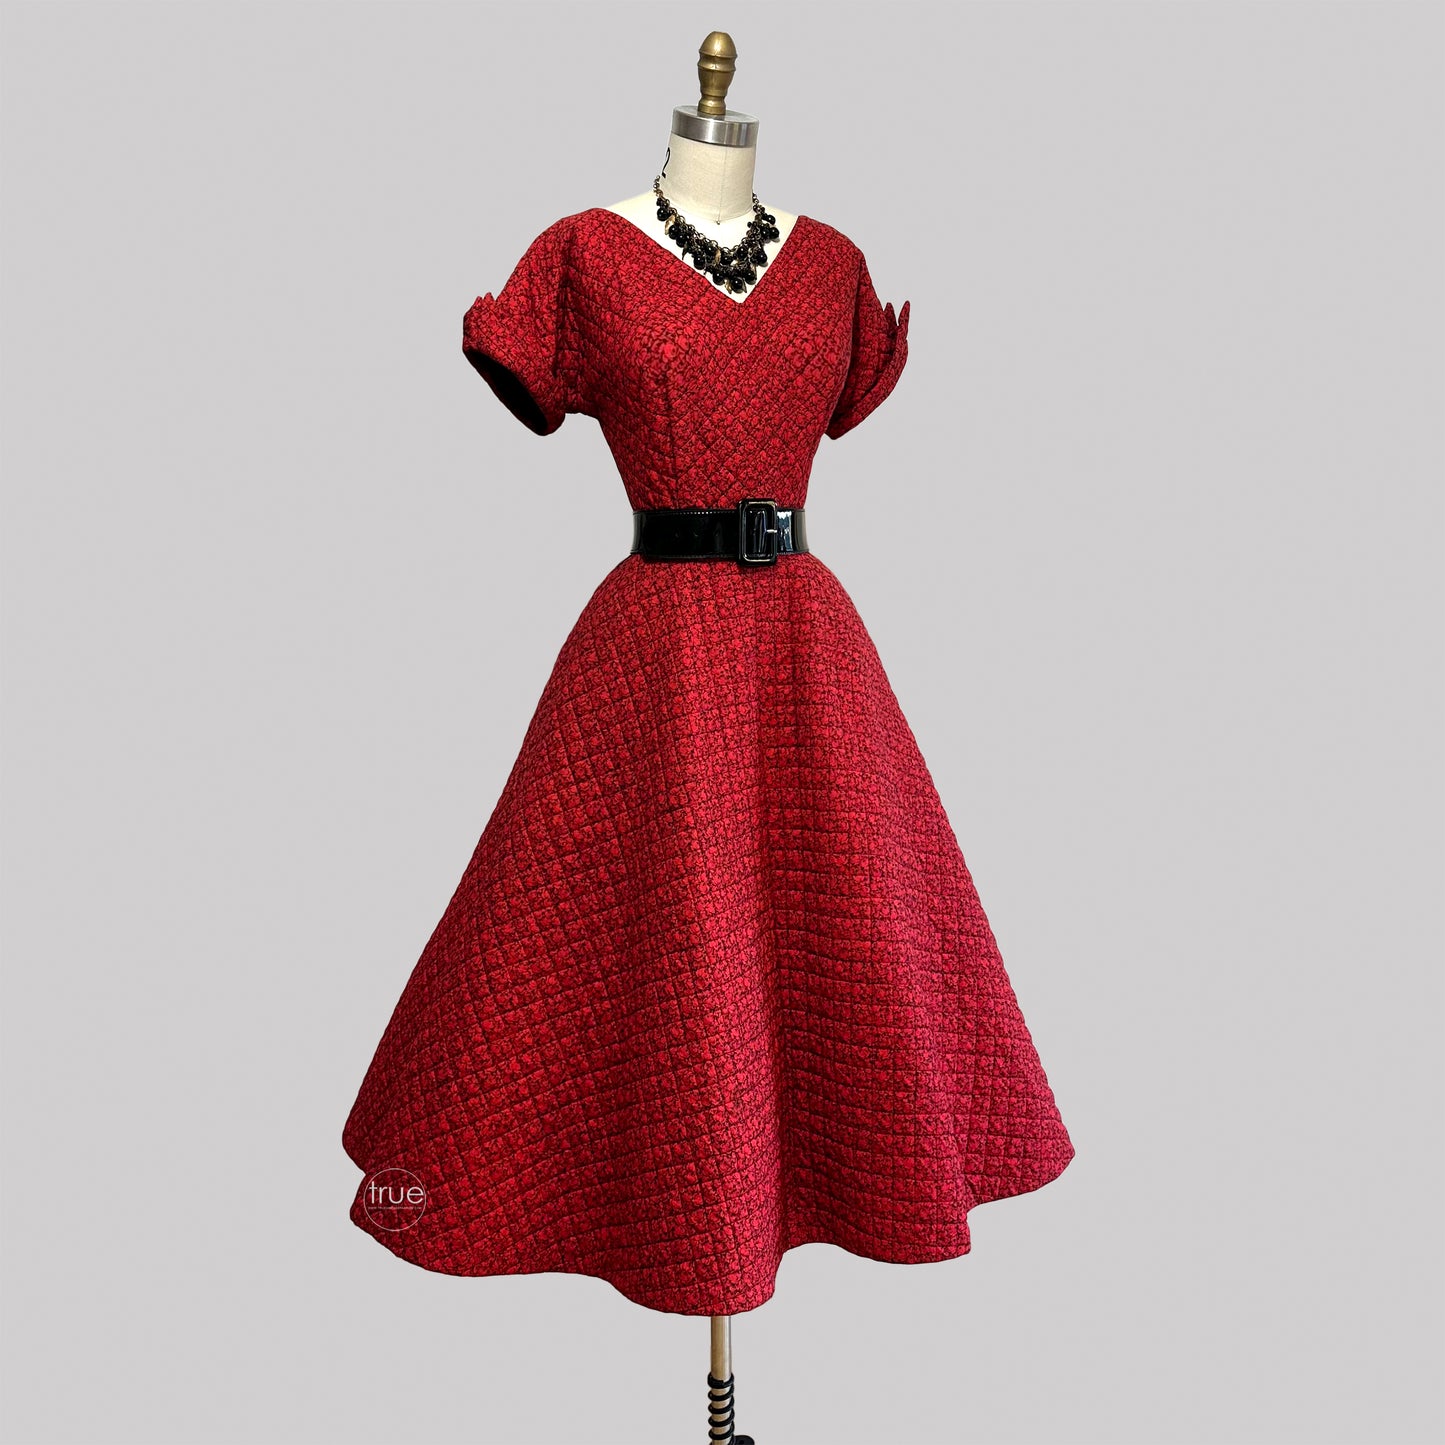 vintage 1950's dress ...quintessential JONATHAN LOGAN red & black floral quilted dress